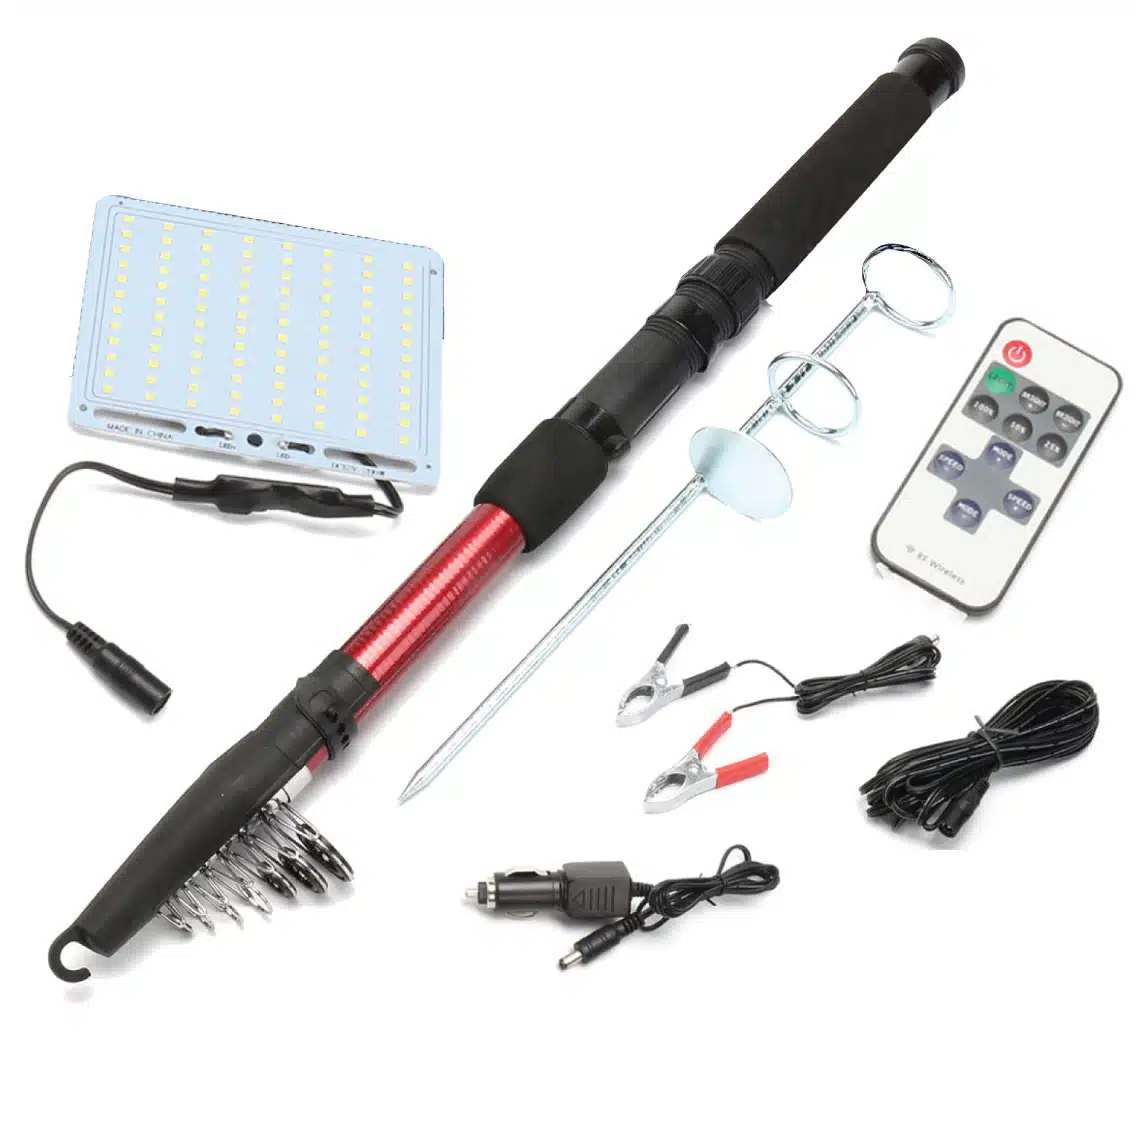 Telescopic Fishing Rod Led Light Outdoor Multifunction Lamp, Shop Today.  Get it Tomorrow!